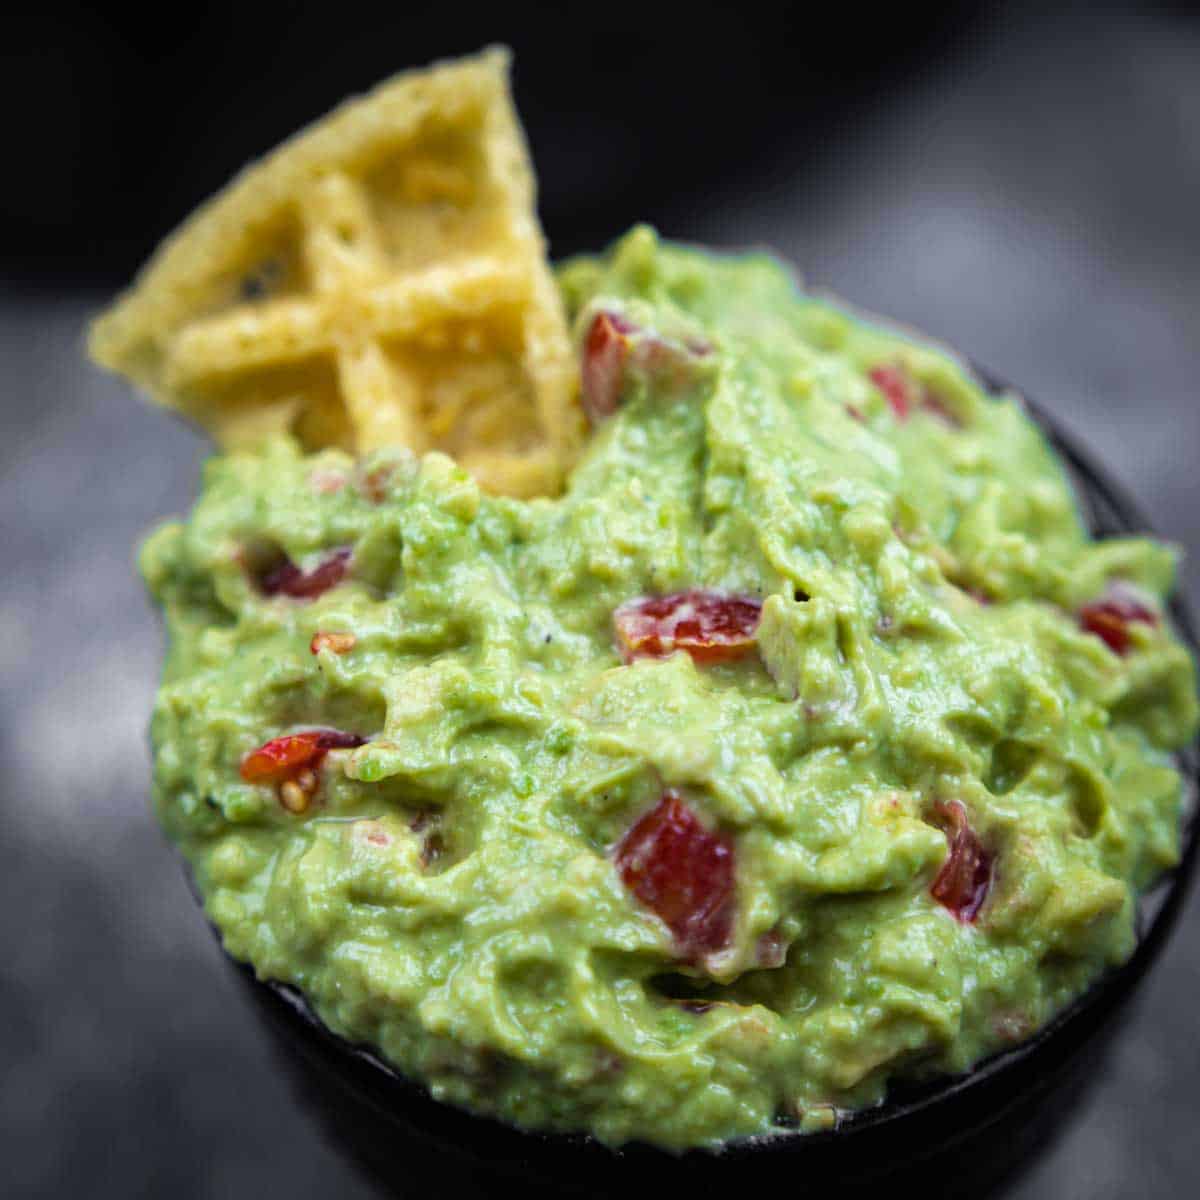 A bowl of guacamole with tortilla chips.